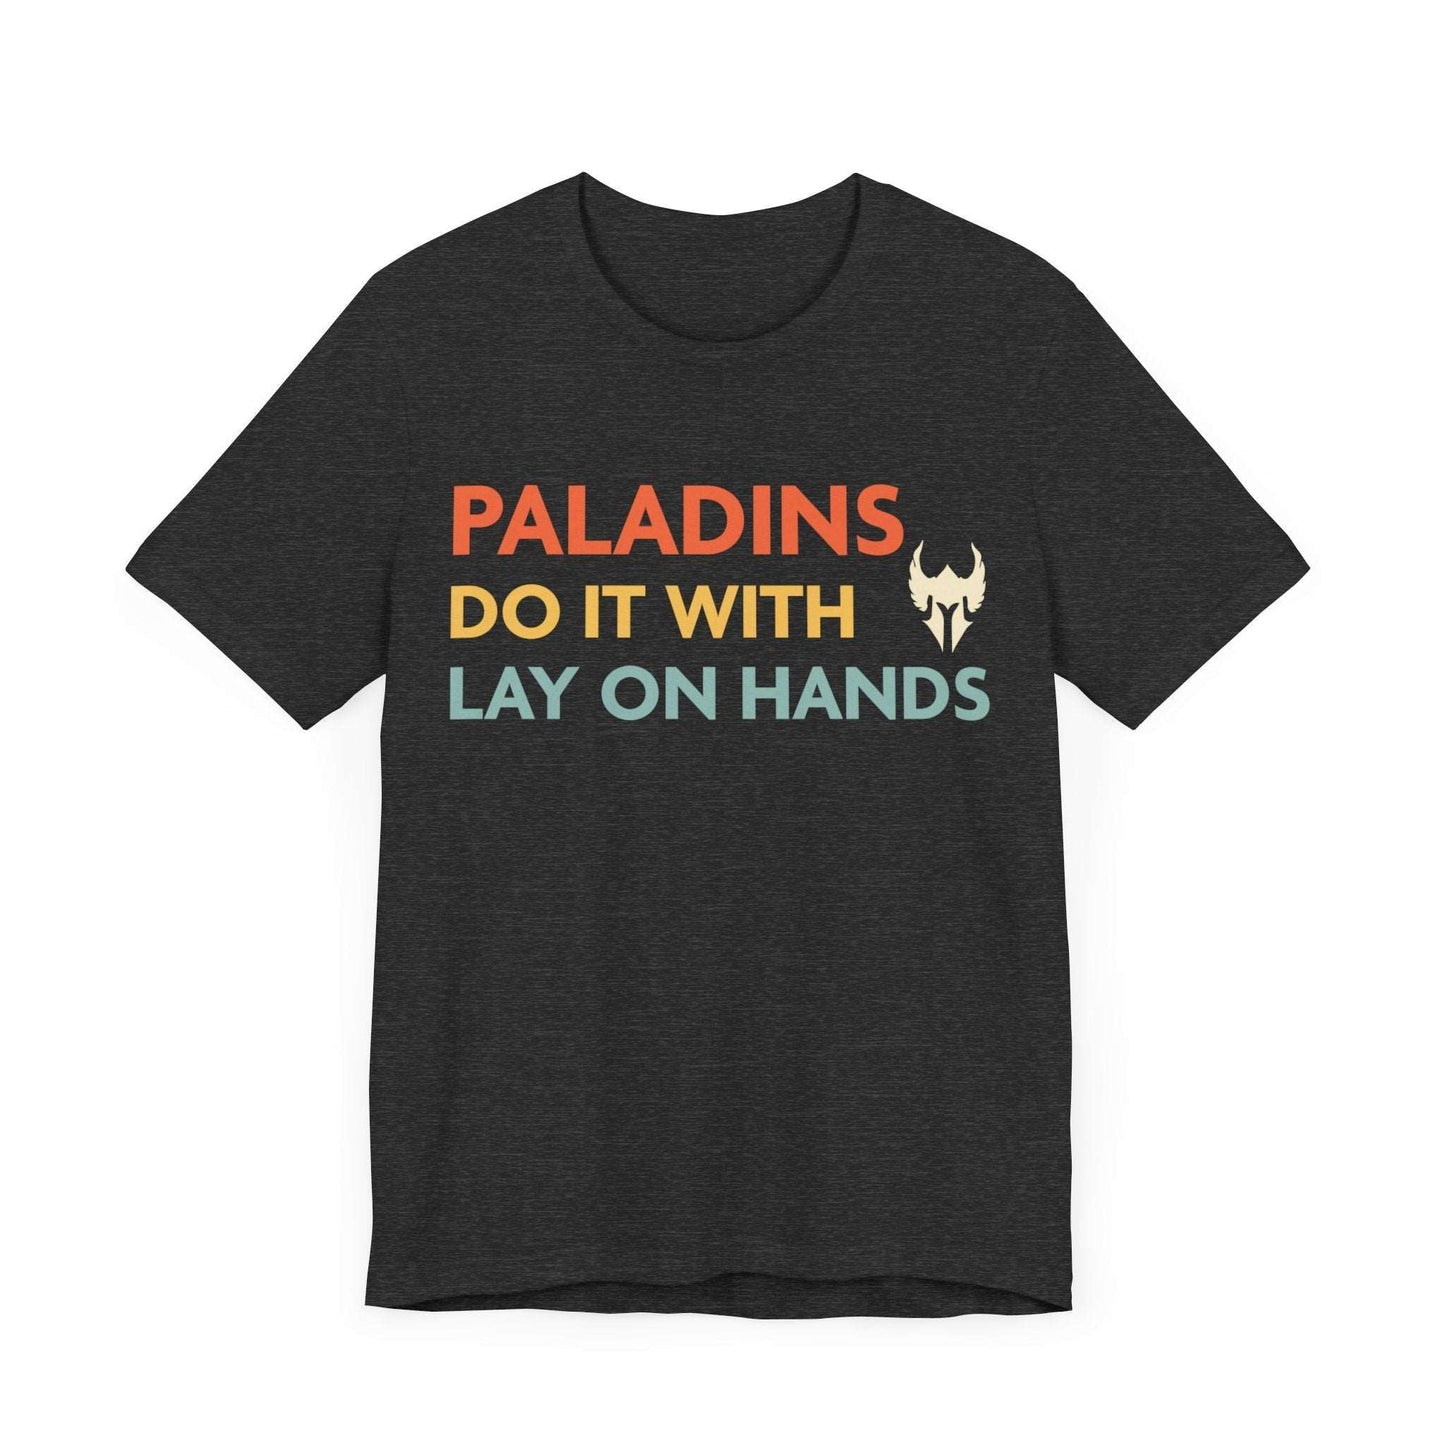 DnD Paladins Do It With Lay On Hands Shirt T-Shirt Dark Grey Heather / S